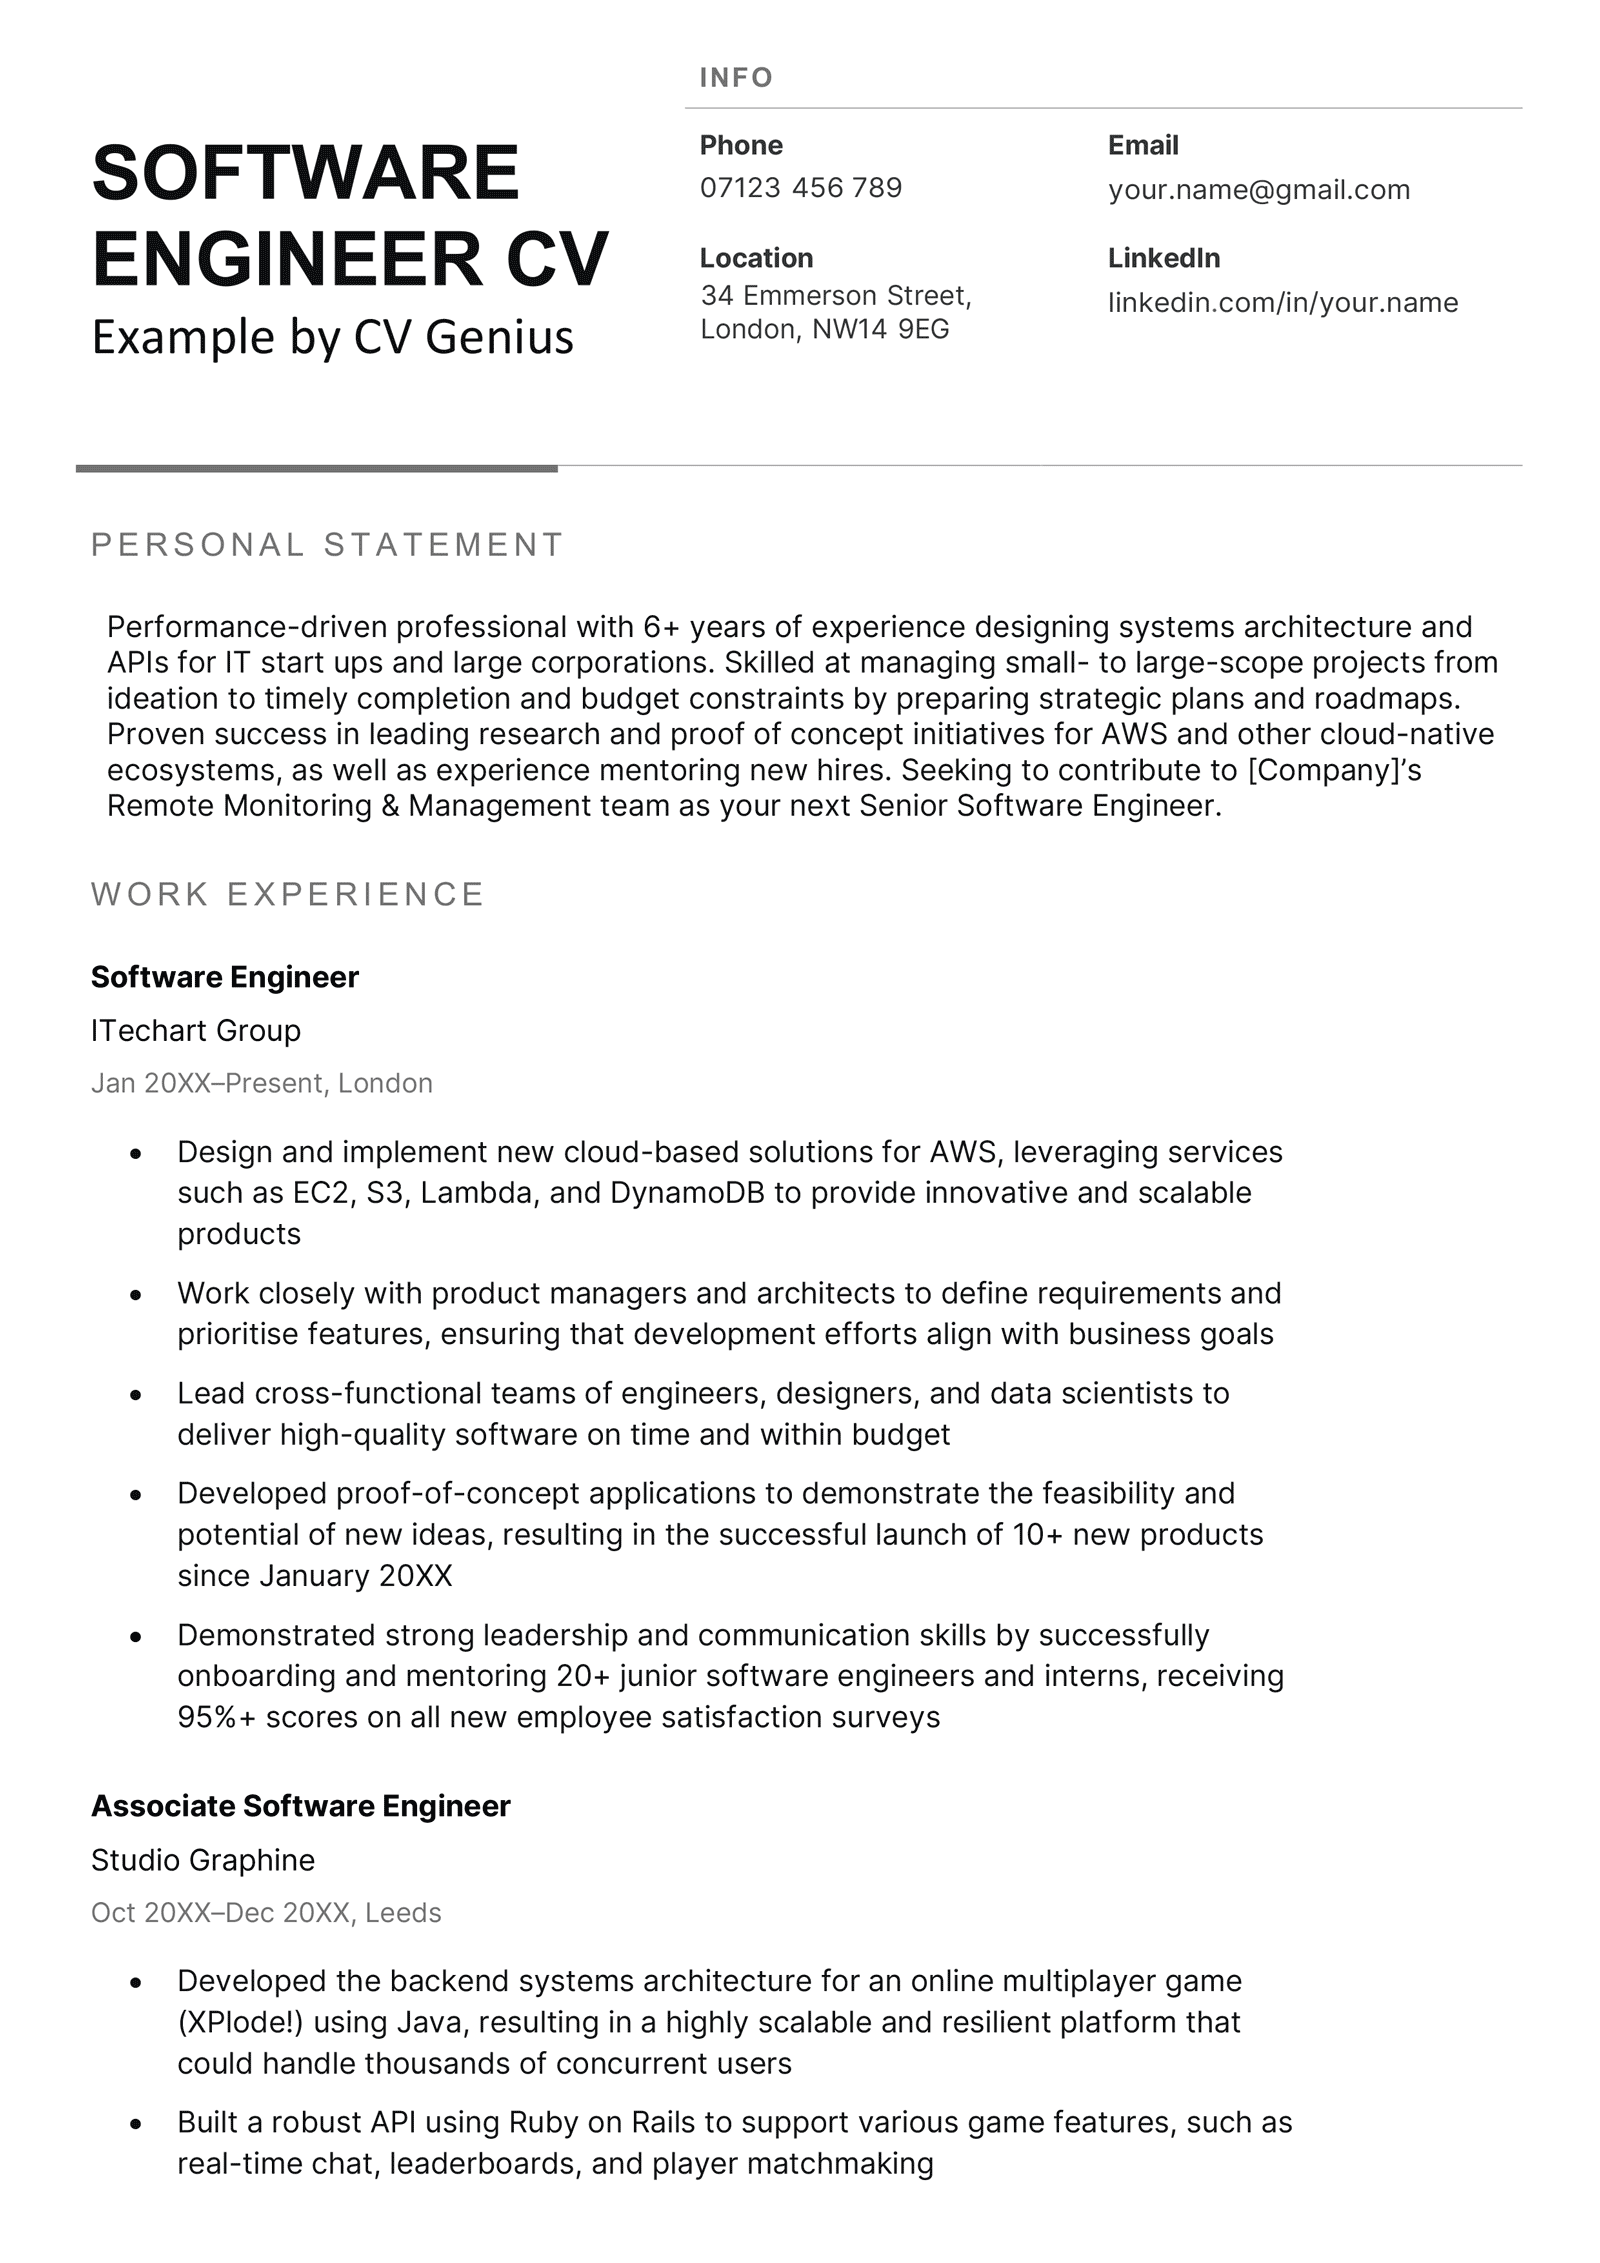 software engineer cv personal statement examples